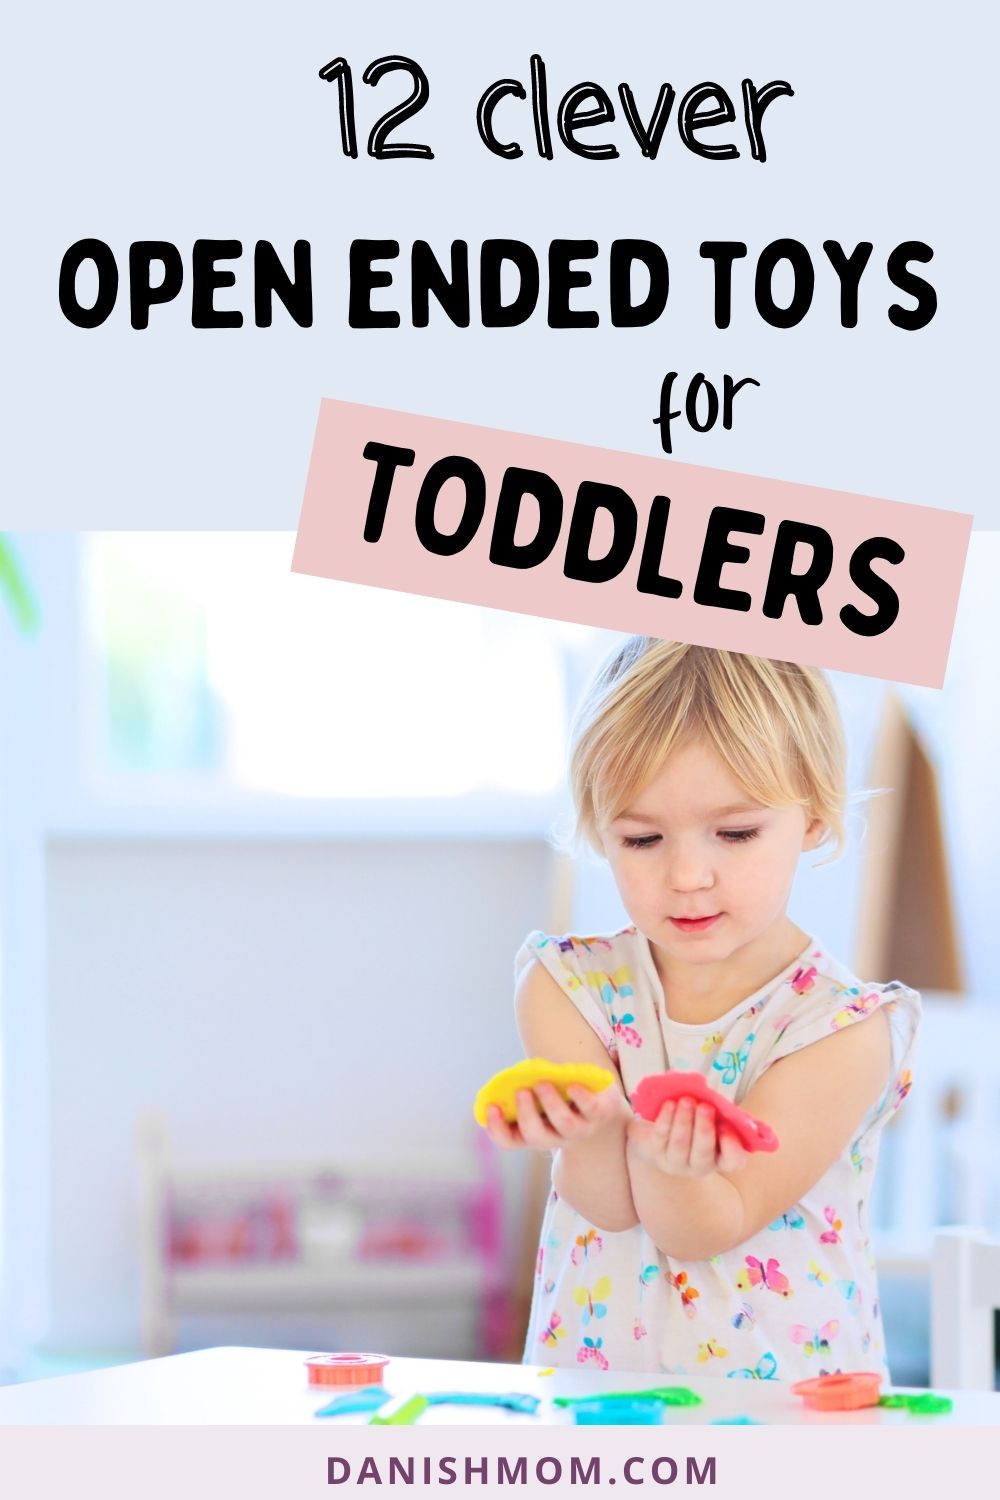 Your toddler will have fun with these 12 budget friendly toddler toys at home. These are simple open ended toys for toddlers that can activate your little one and you can call it a parenting win.